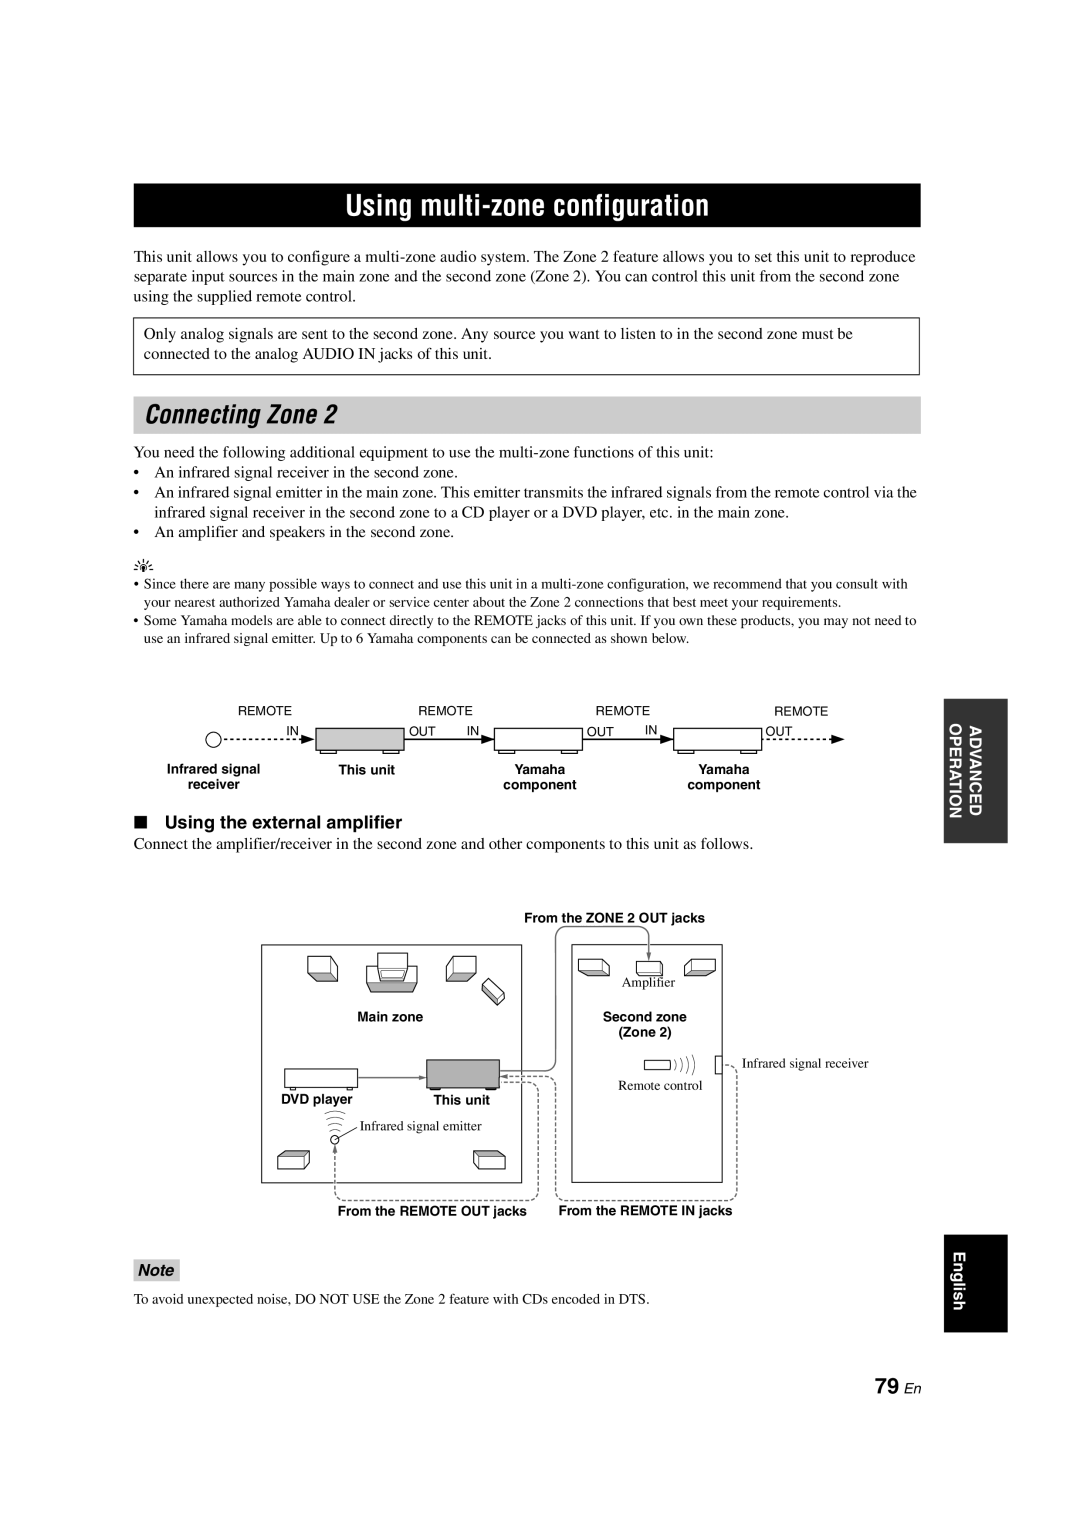 Yamaha HTR-6150 owner manual Using multi-zoneconfiguration, Connecting Zone, 79 En, Using the external amplifier 